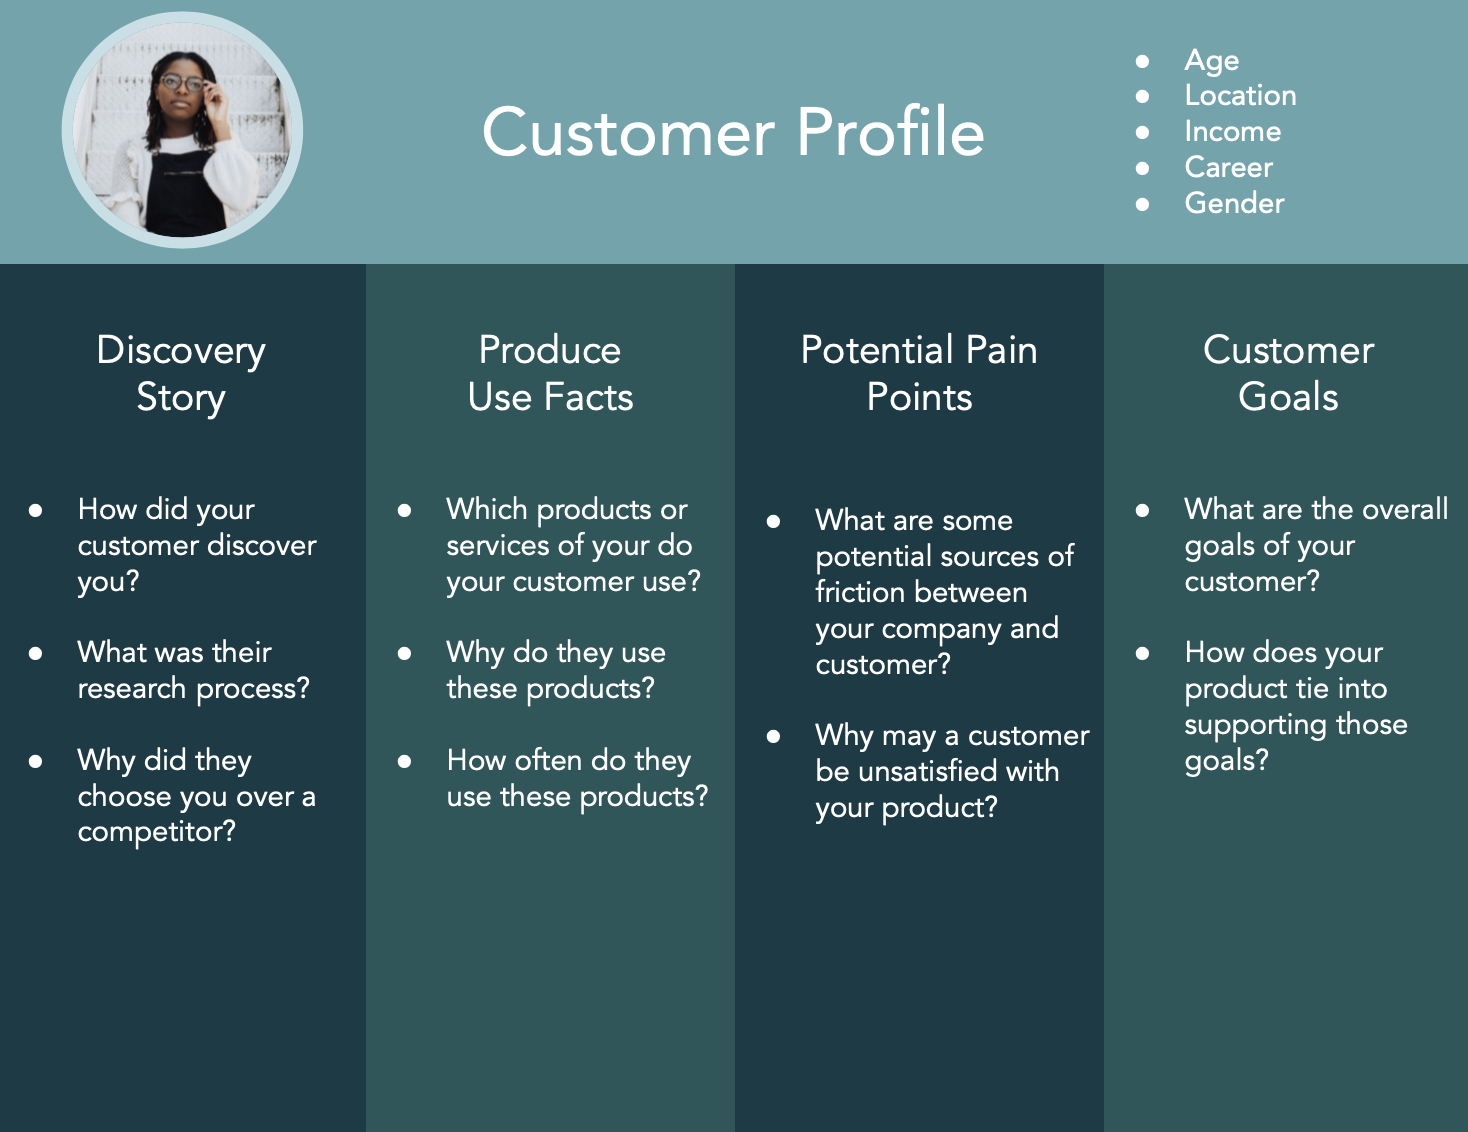 8 Free Customer Profile Templates Download Your Copy